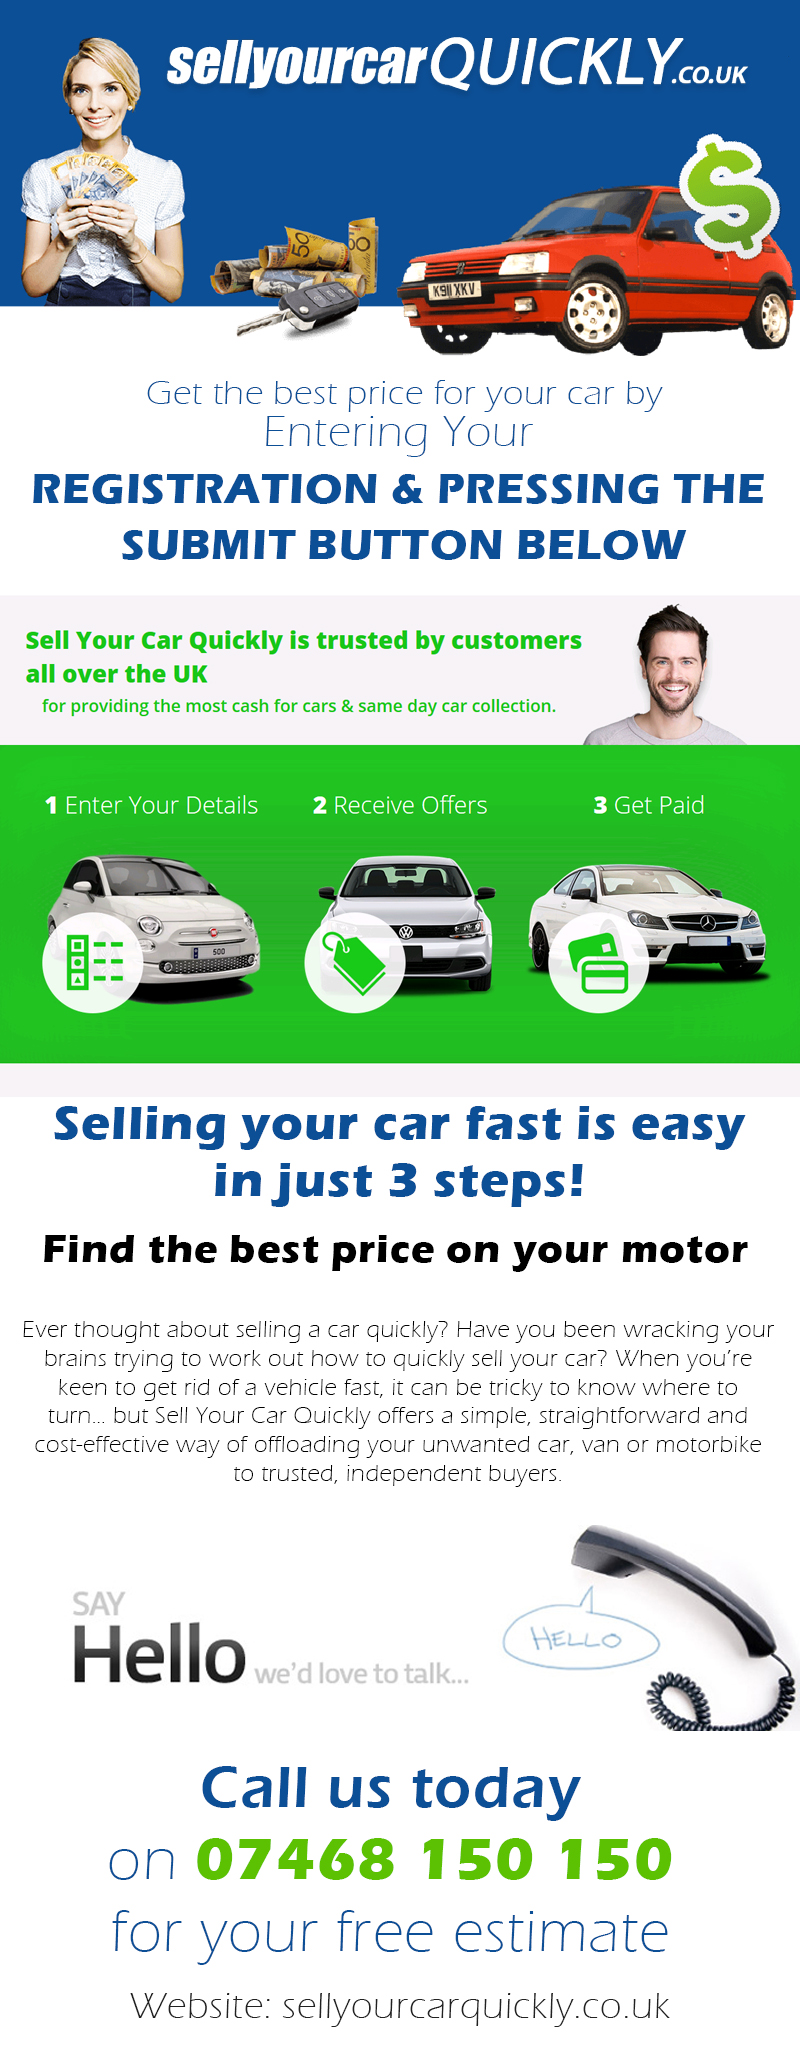 Sell Your Car Quickly I Wanna Sell My Car! Sell your old car quickly for cash and making it easy to sell for Scrap My Car drivers. Website: https://sellyourcarquickly.co.uk/ by sellyourcarquickly